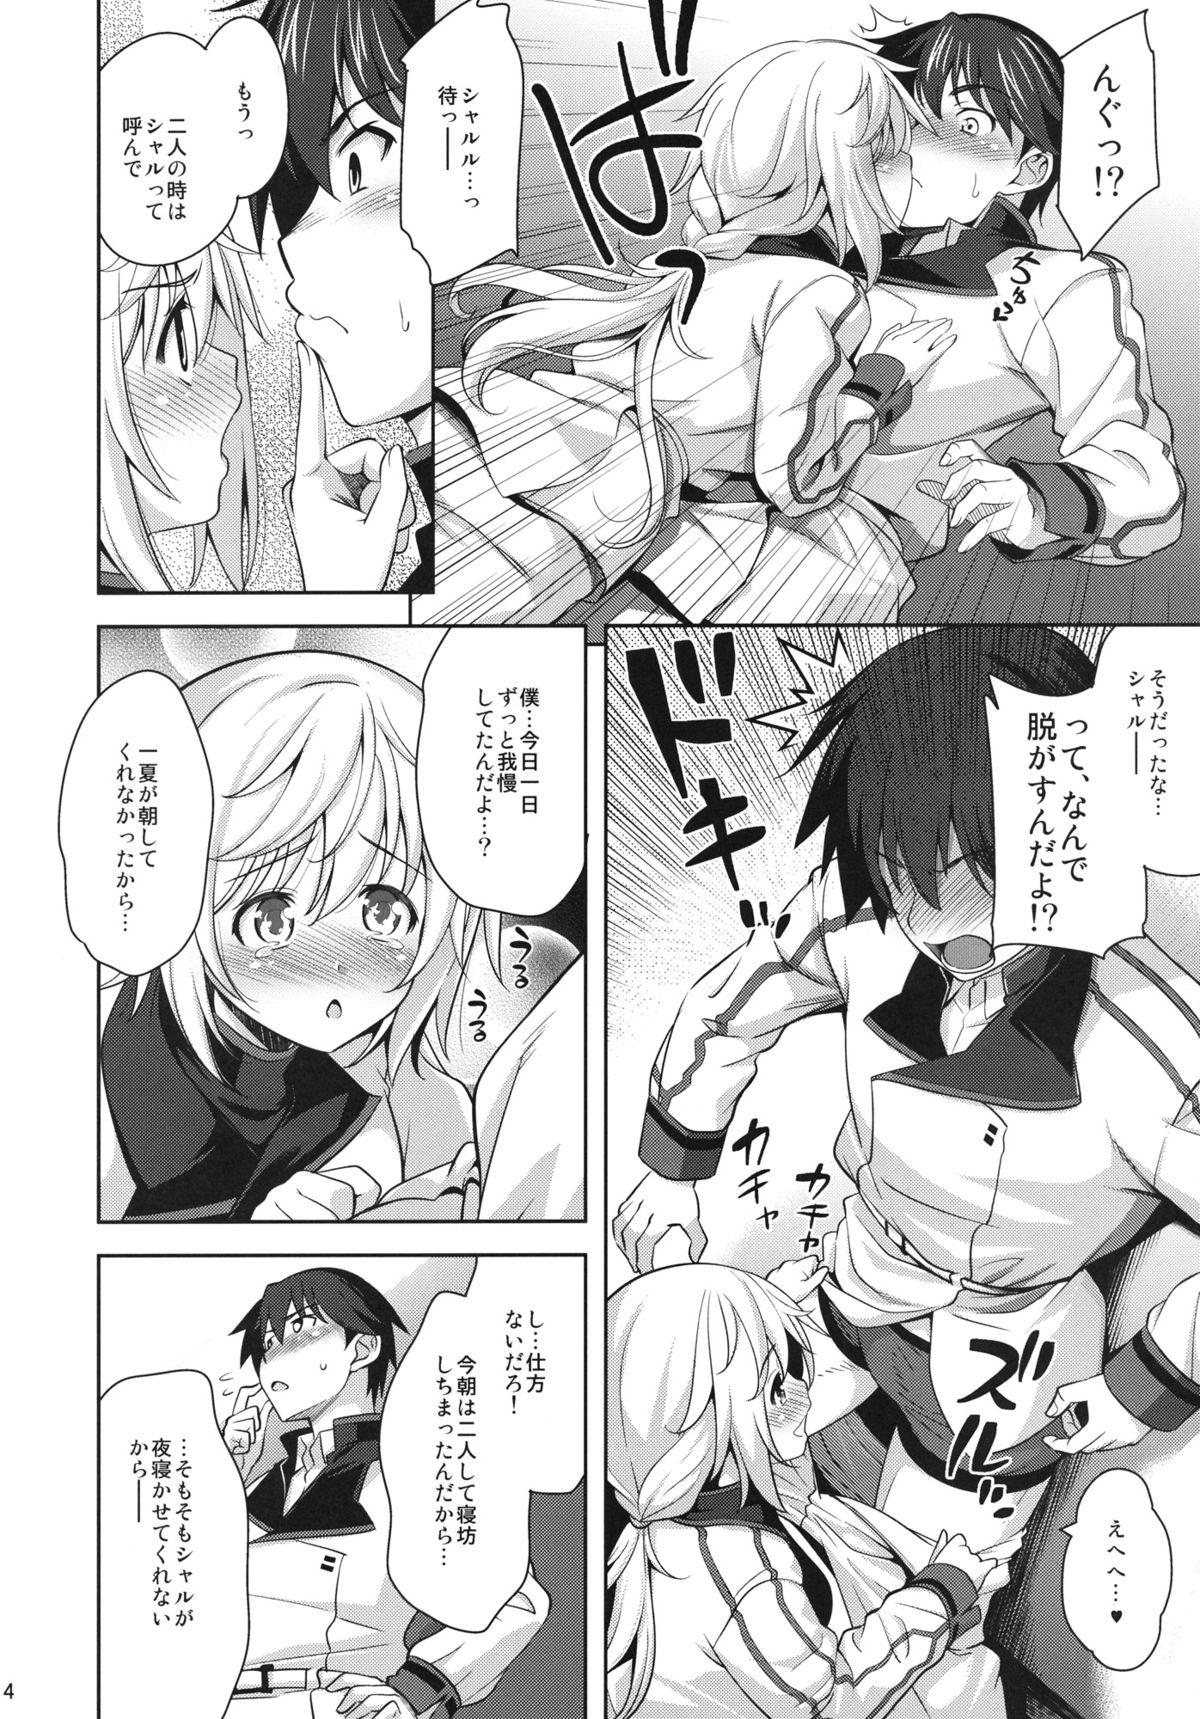 Love Making Shall we...? - Infinite stratos Squirt - Page 6